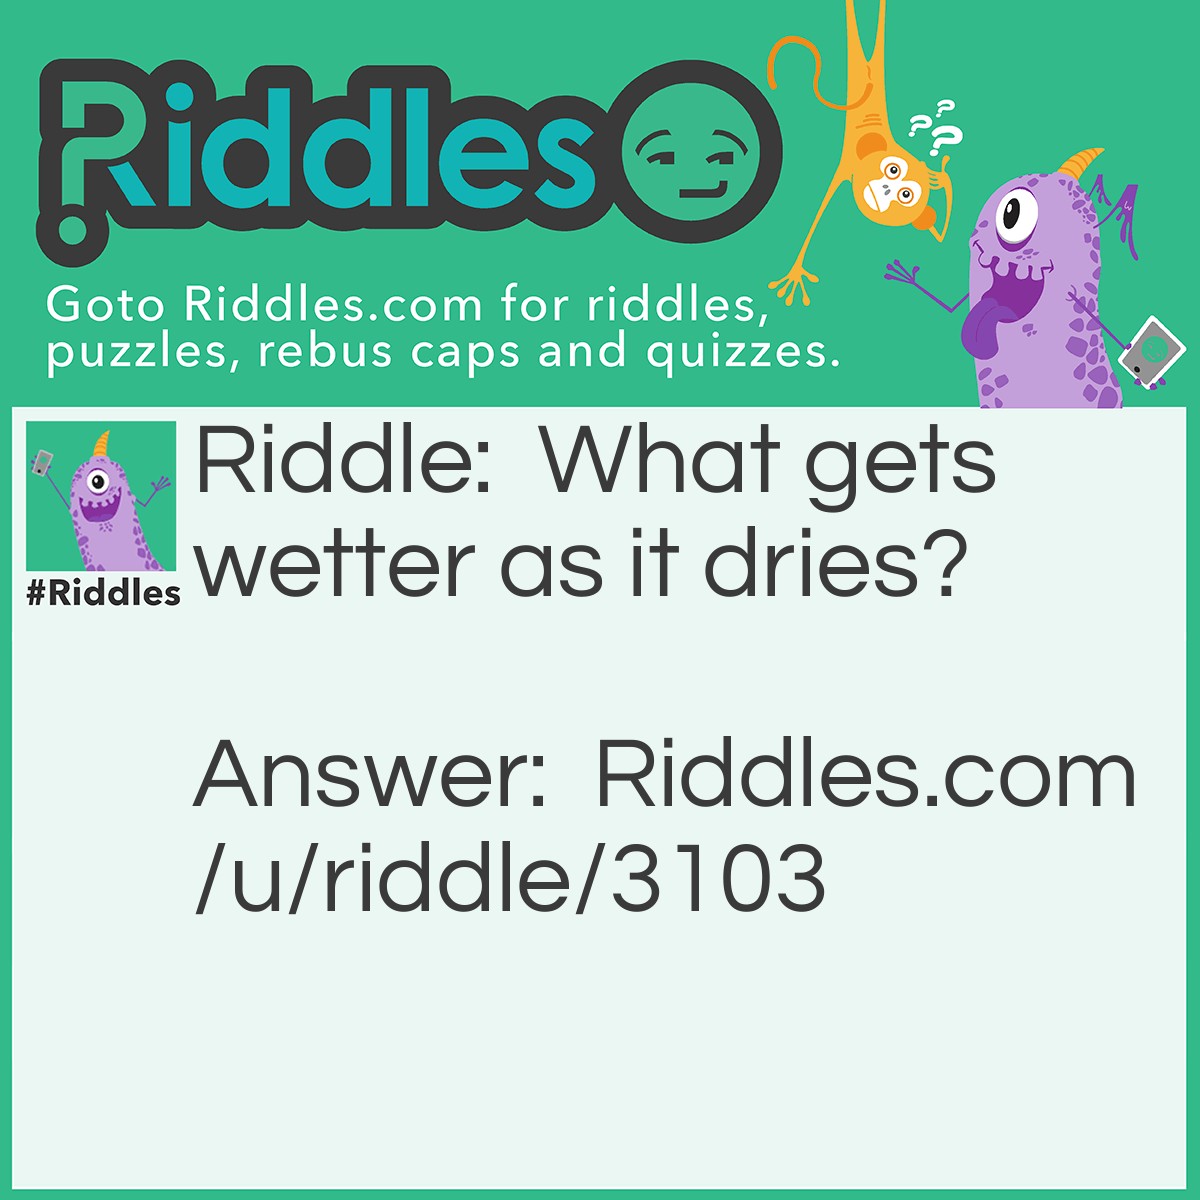 Riddle: What gets wetter as it dries? Answer: A Towel.